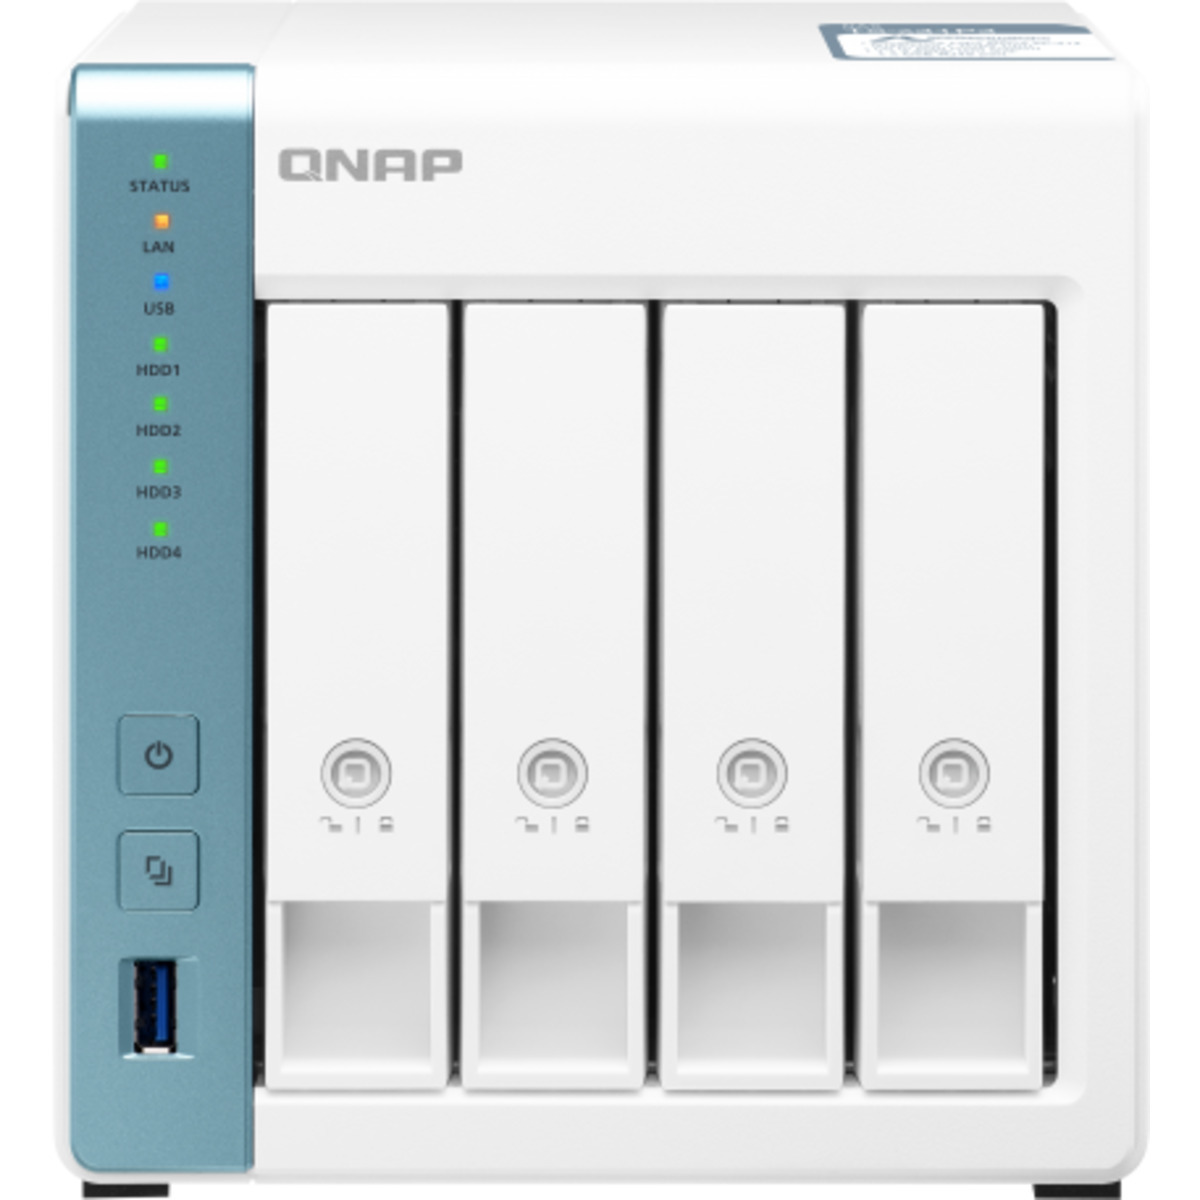 buy $1515 QNAP TS-431P3 32tb Desktop NAS - Network Attached Storage Device 4x8000gb Toshiba Enterprise Capacity MG08ADA800E 3.5 7200rpm SATA 6Gb/s HDD ENTERPRISE Class Drives Installed - Burn-In Tested - ON SALE - FREE RAM UPGRADE - nas headquarters buy network attached storage server device das new raid-5 free shipping usa christmas new year holiday sale TS-431P3